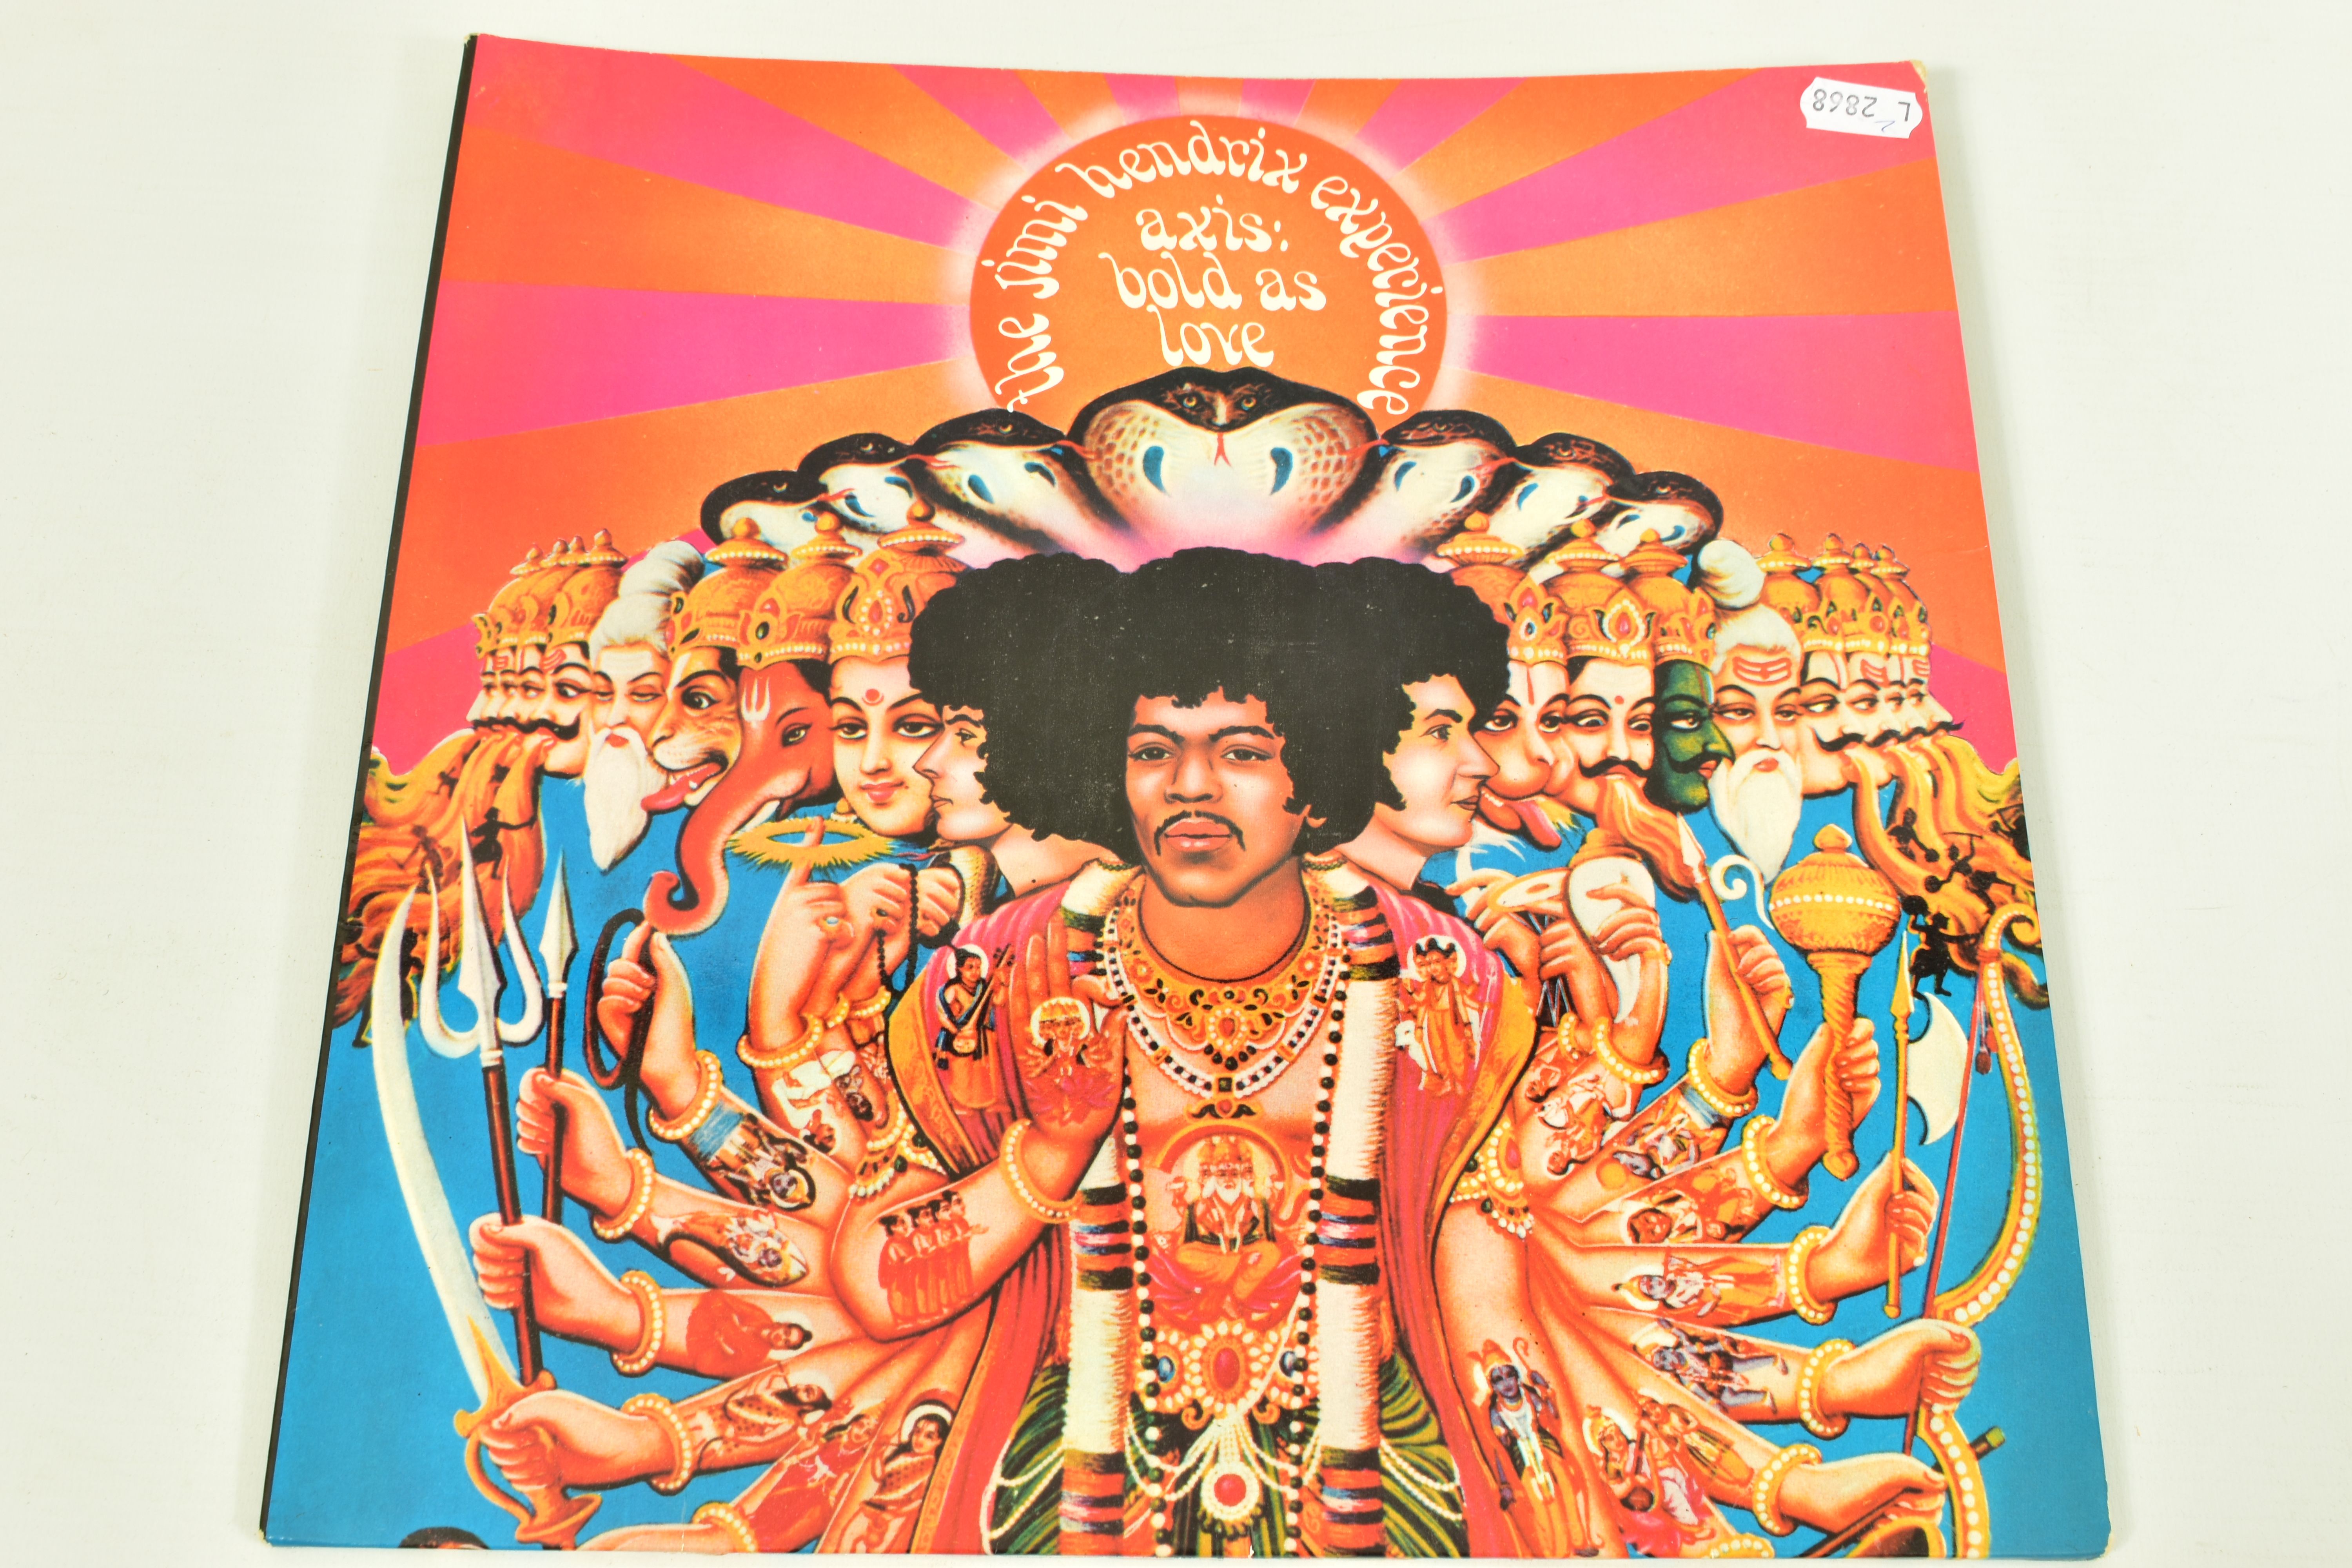 THE JIMI HENDRIX EXPERIENCE; AXIS BOLD AS LOVE and Pink Floyd Animals, Relic and Darkside of the - Bild 5 aus 5